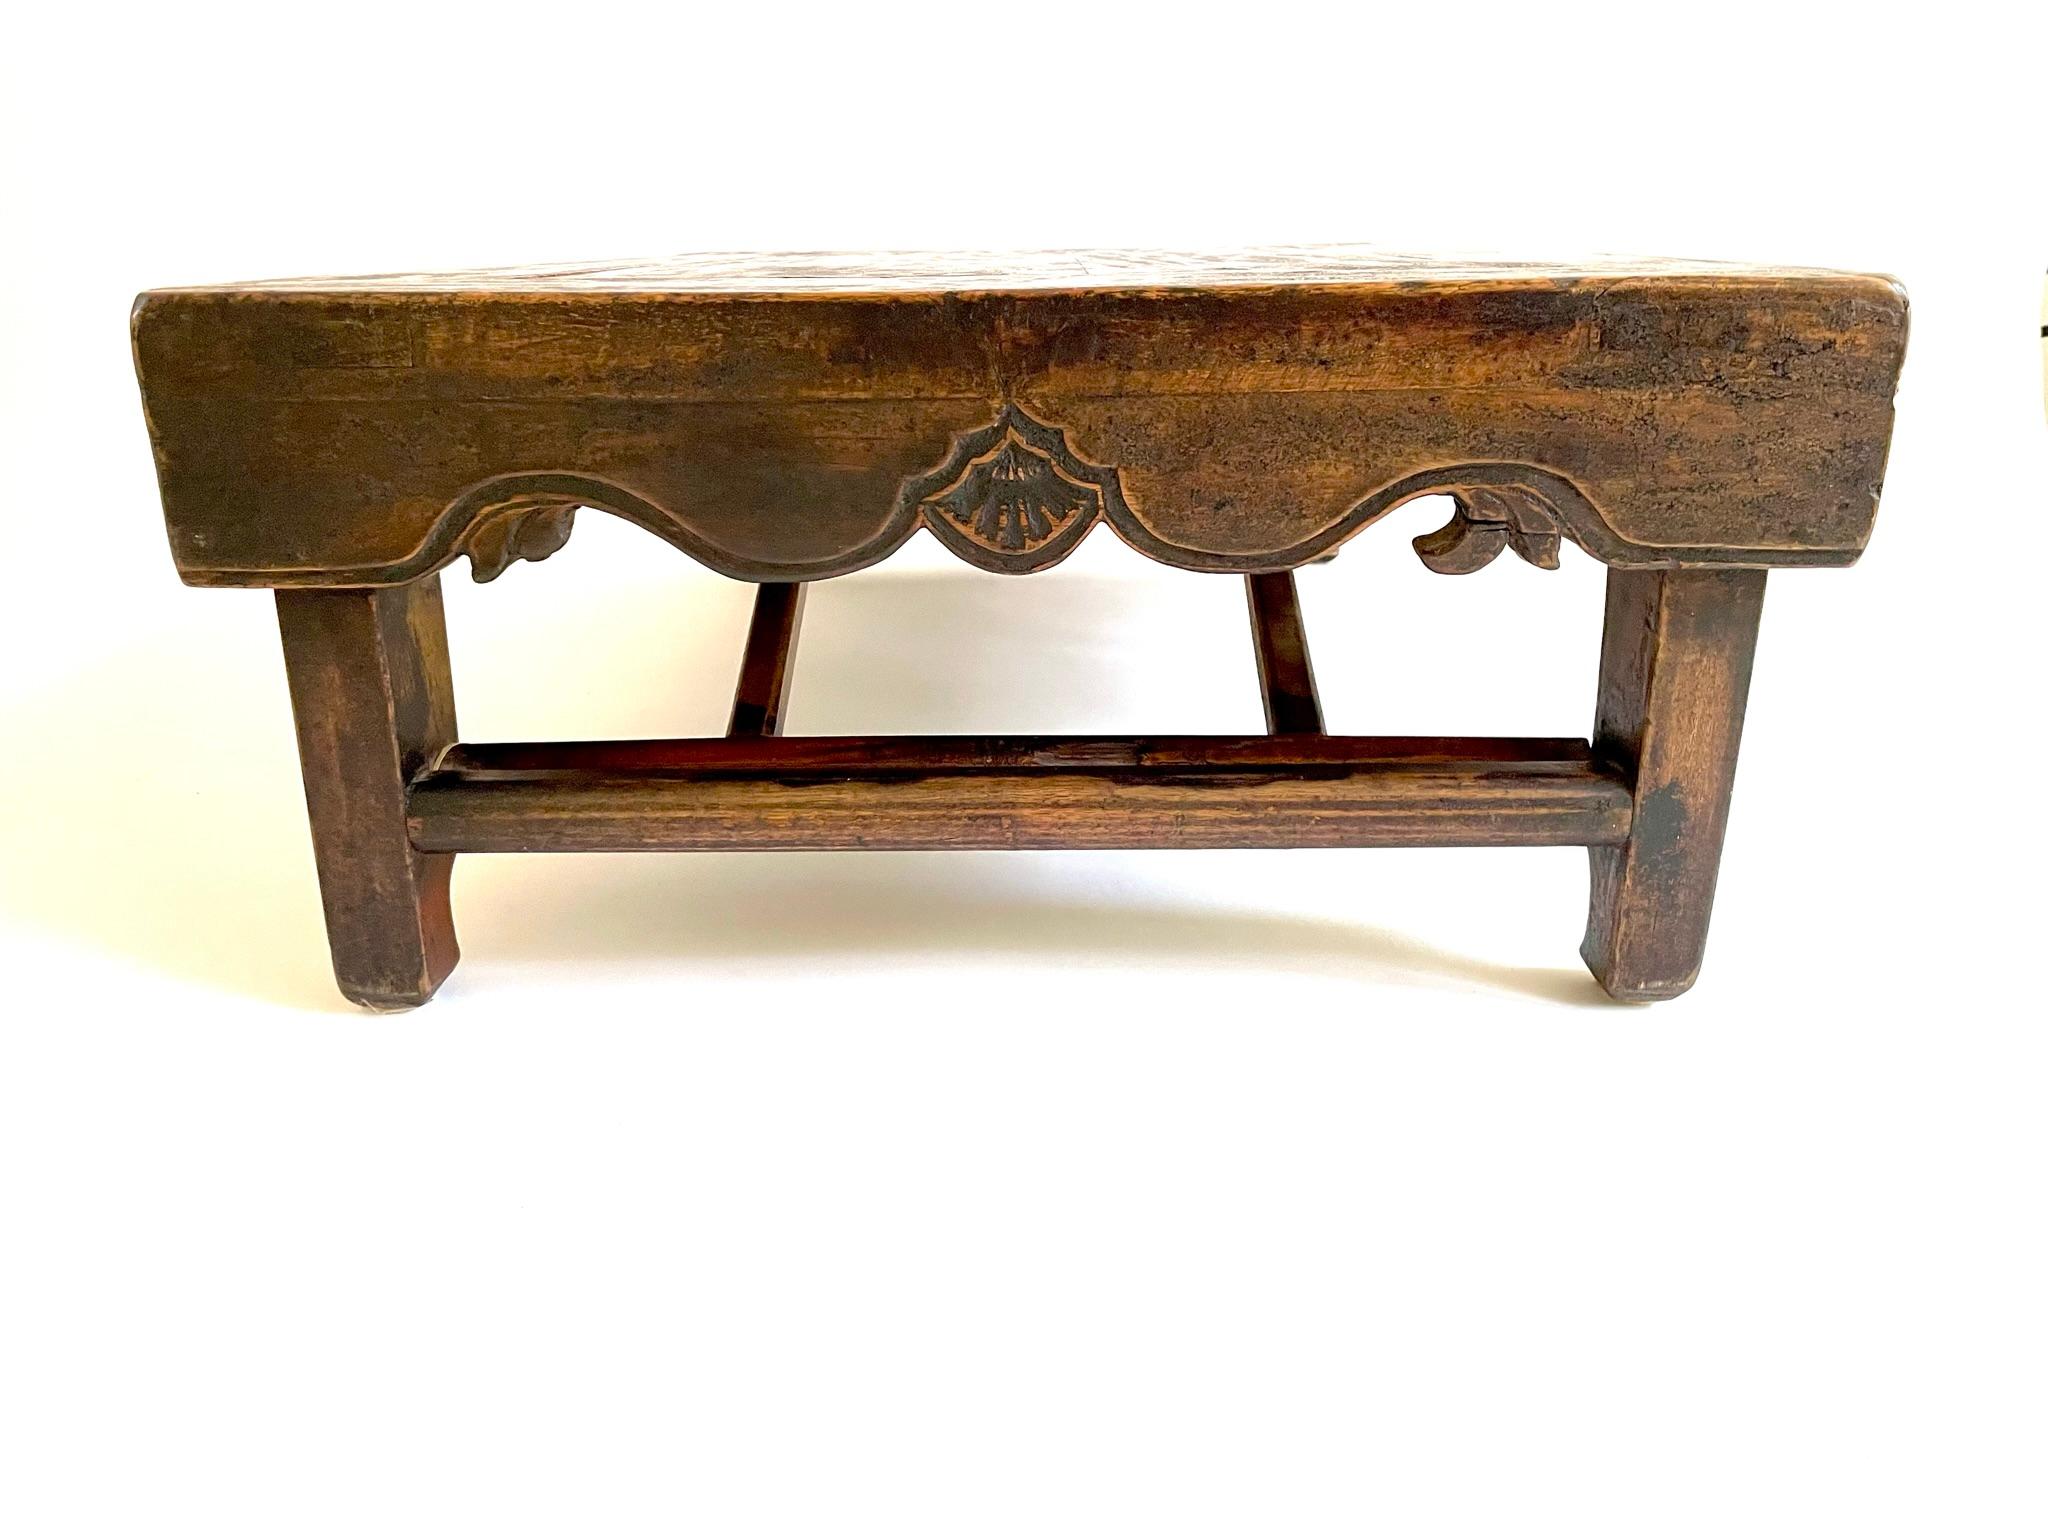 Rare 19th Century Chinese Folding Low Table 'Kang Table' For Sale 7